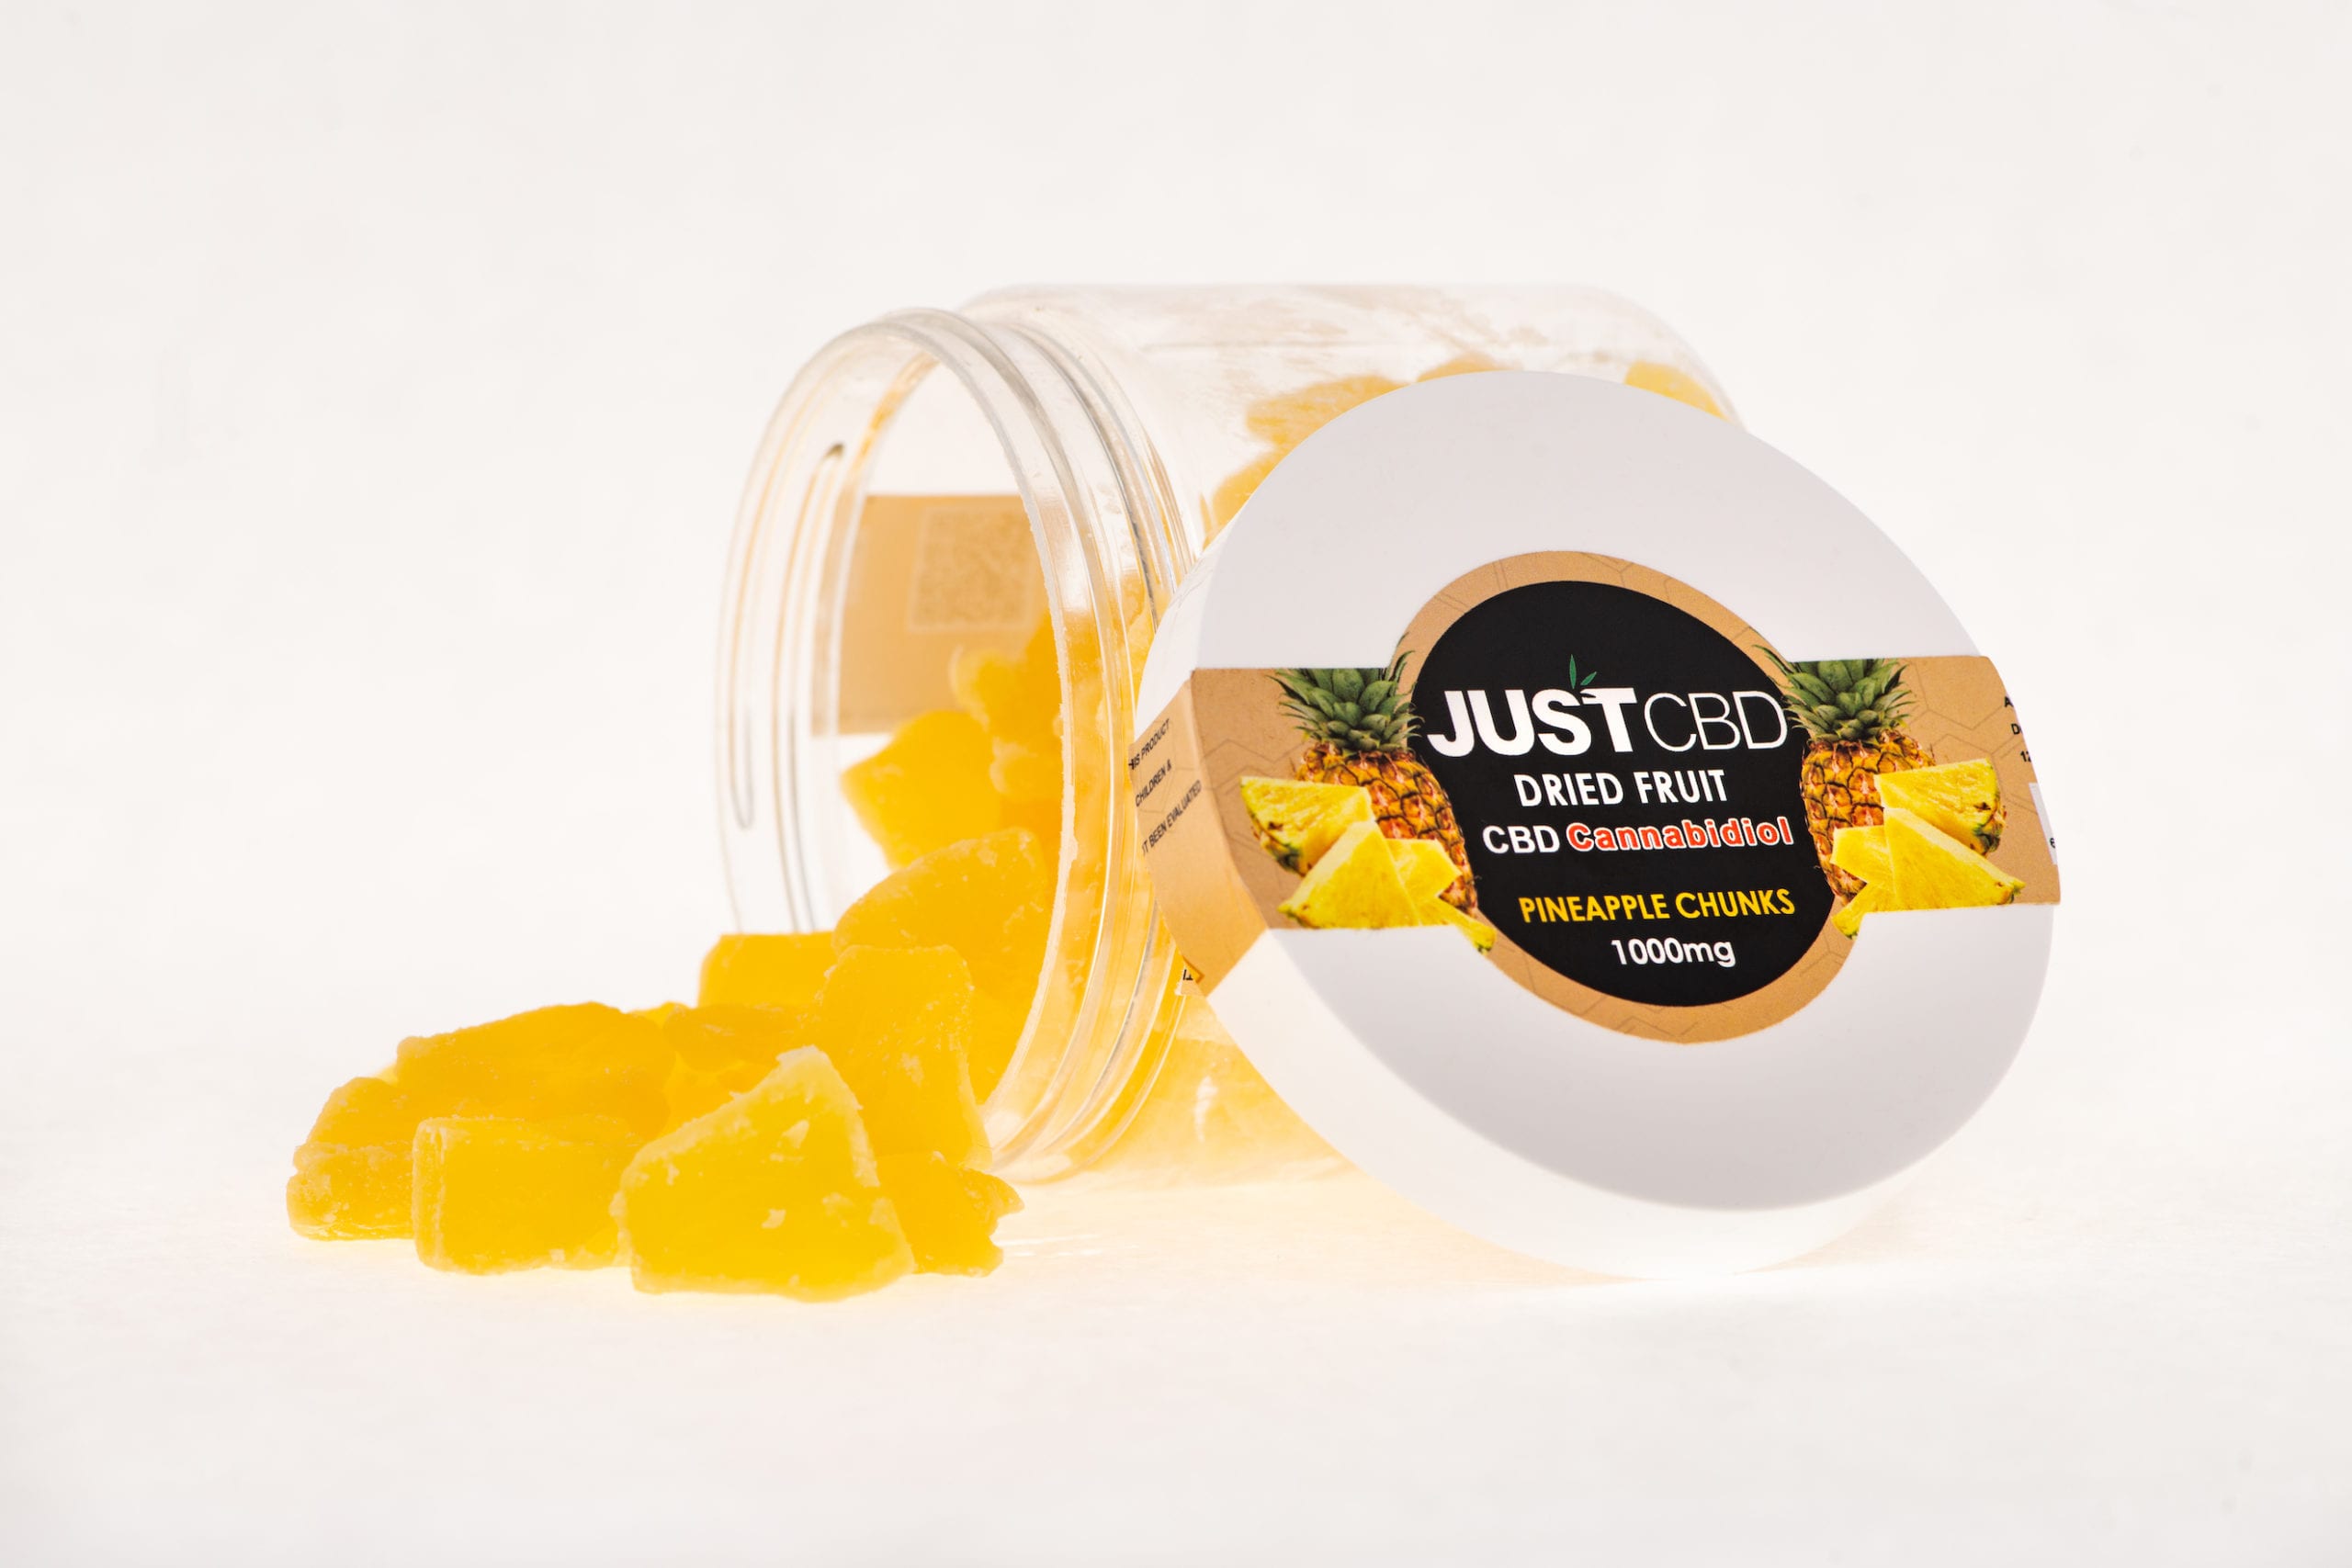 JustCBD Product Photography and JustCBD Products Pineapple chunks on display